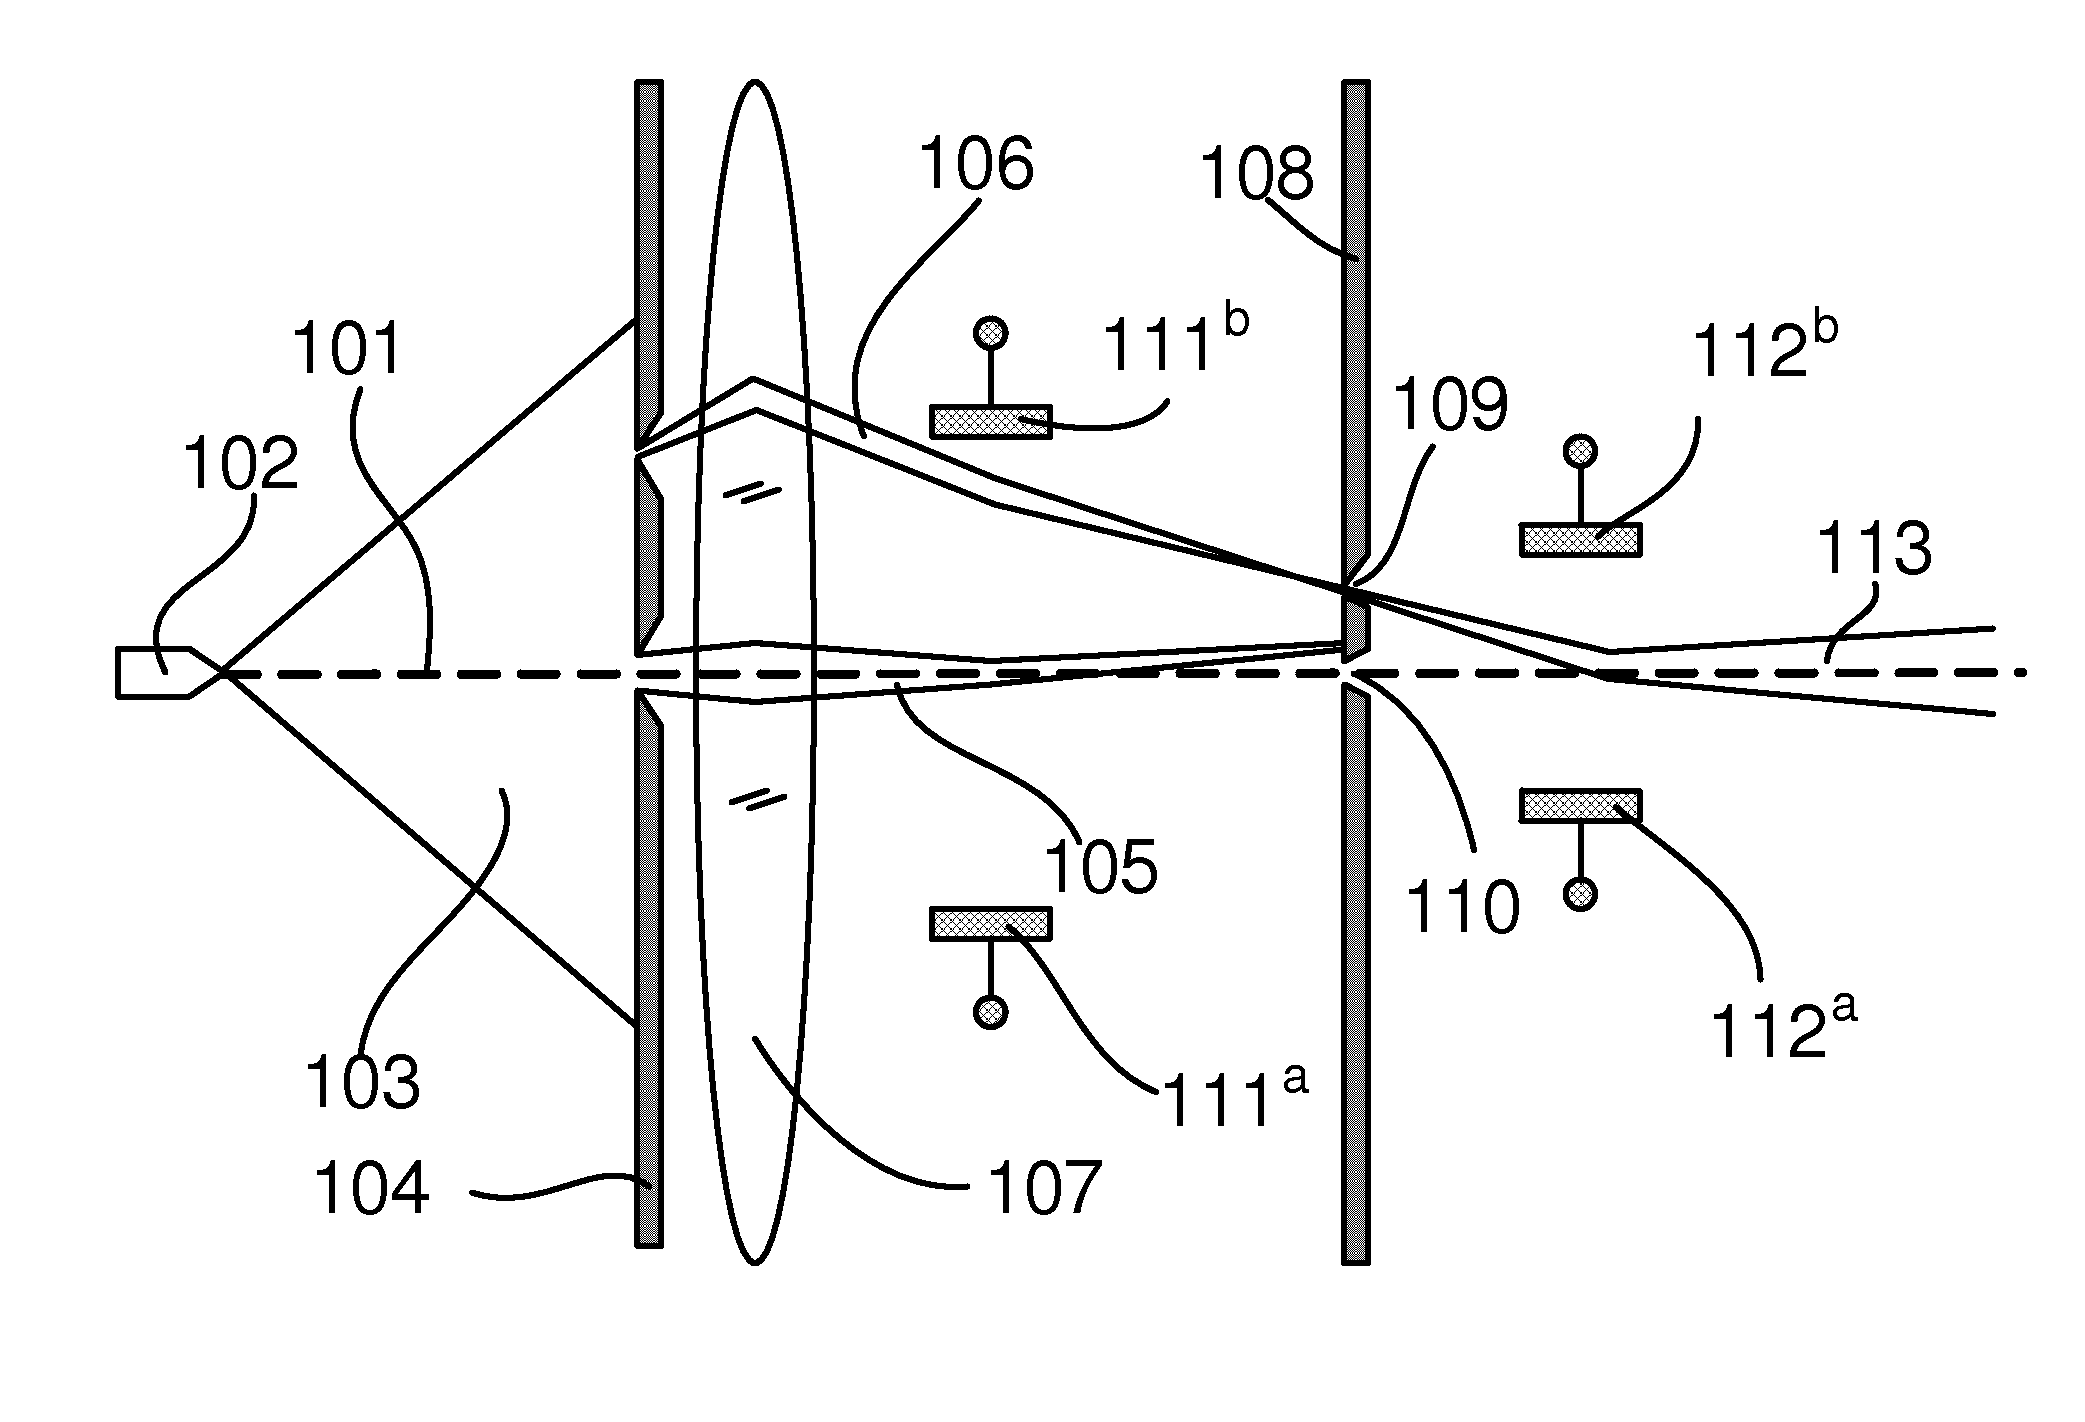 Charged Particle Source with Integrated Energy Filter